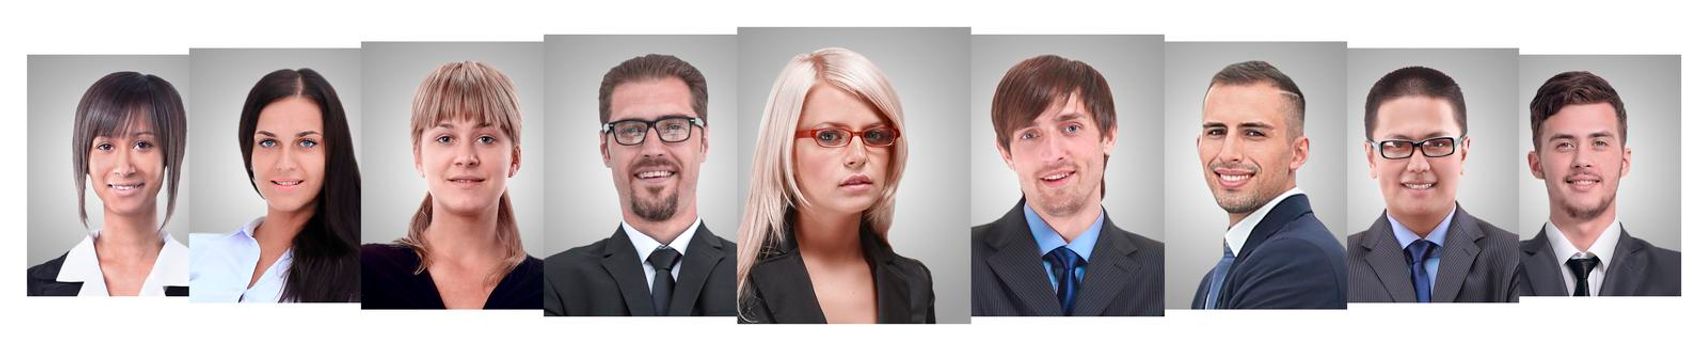 panoramic collage of portraits of young entrepreneurs. business concept